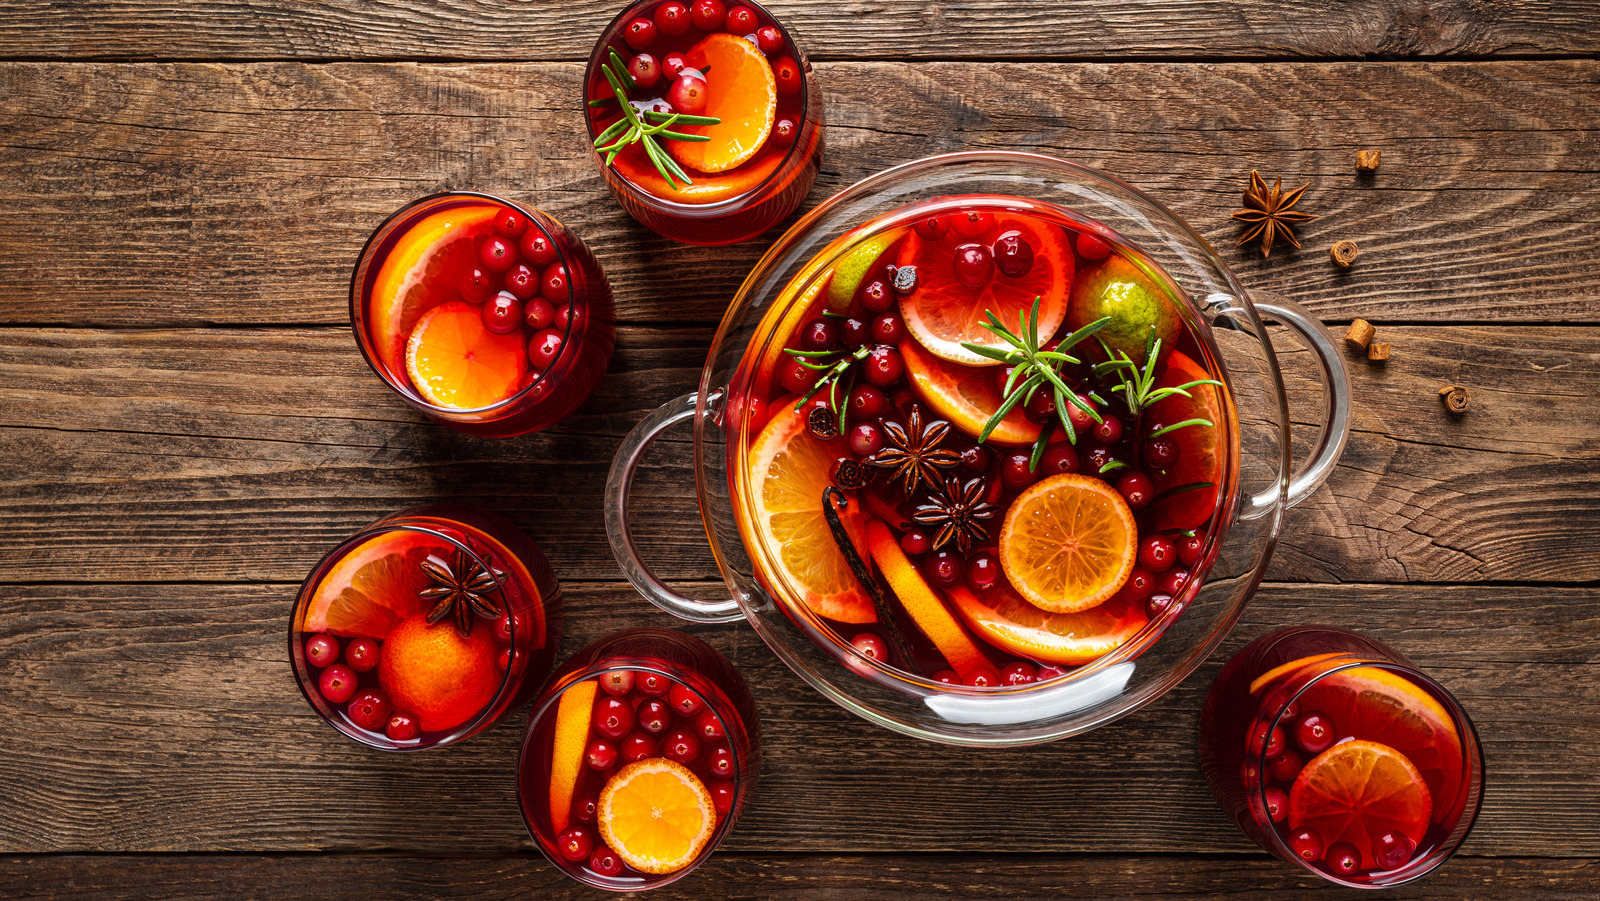 https://www.foodrepublic.com/img/gallery/the-best-batch-cocktails-to-make-for-your-next-holiday-party-according-to-an-expert/l-intro-1700510891.jpg